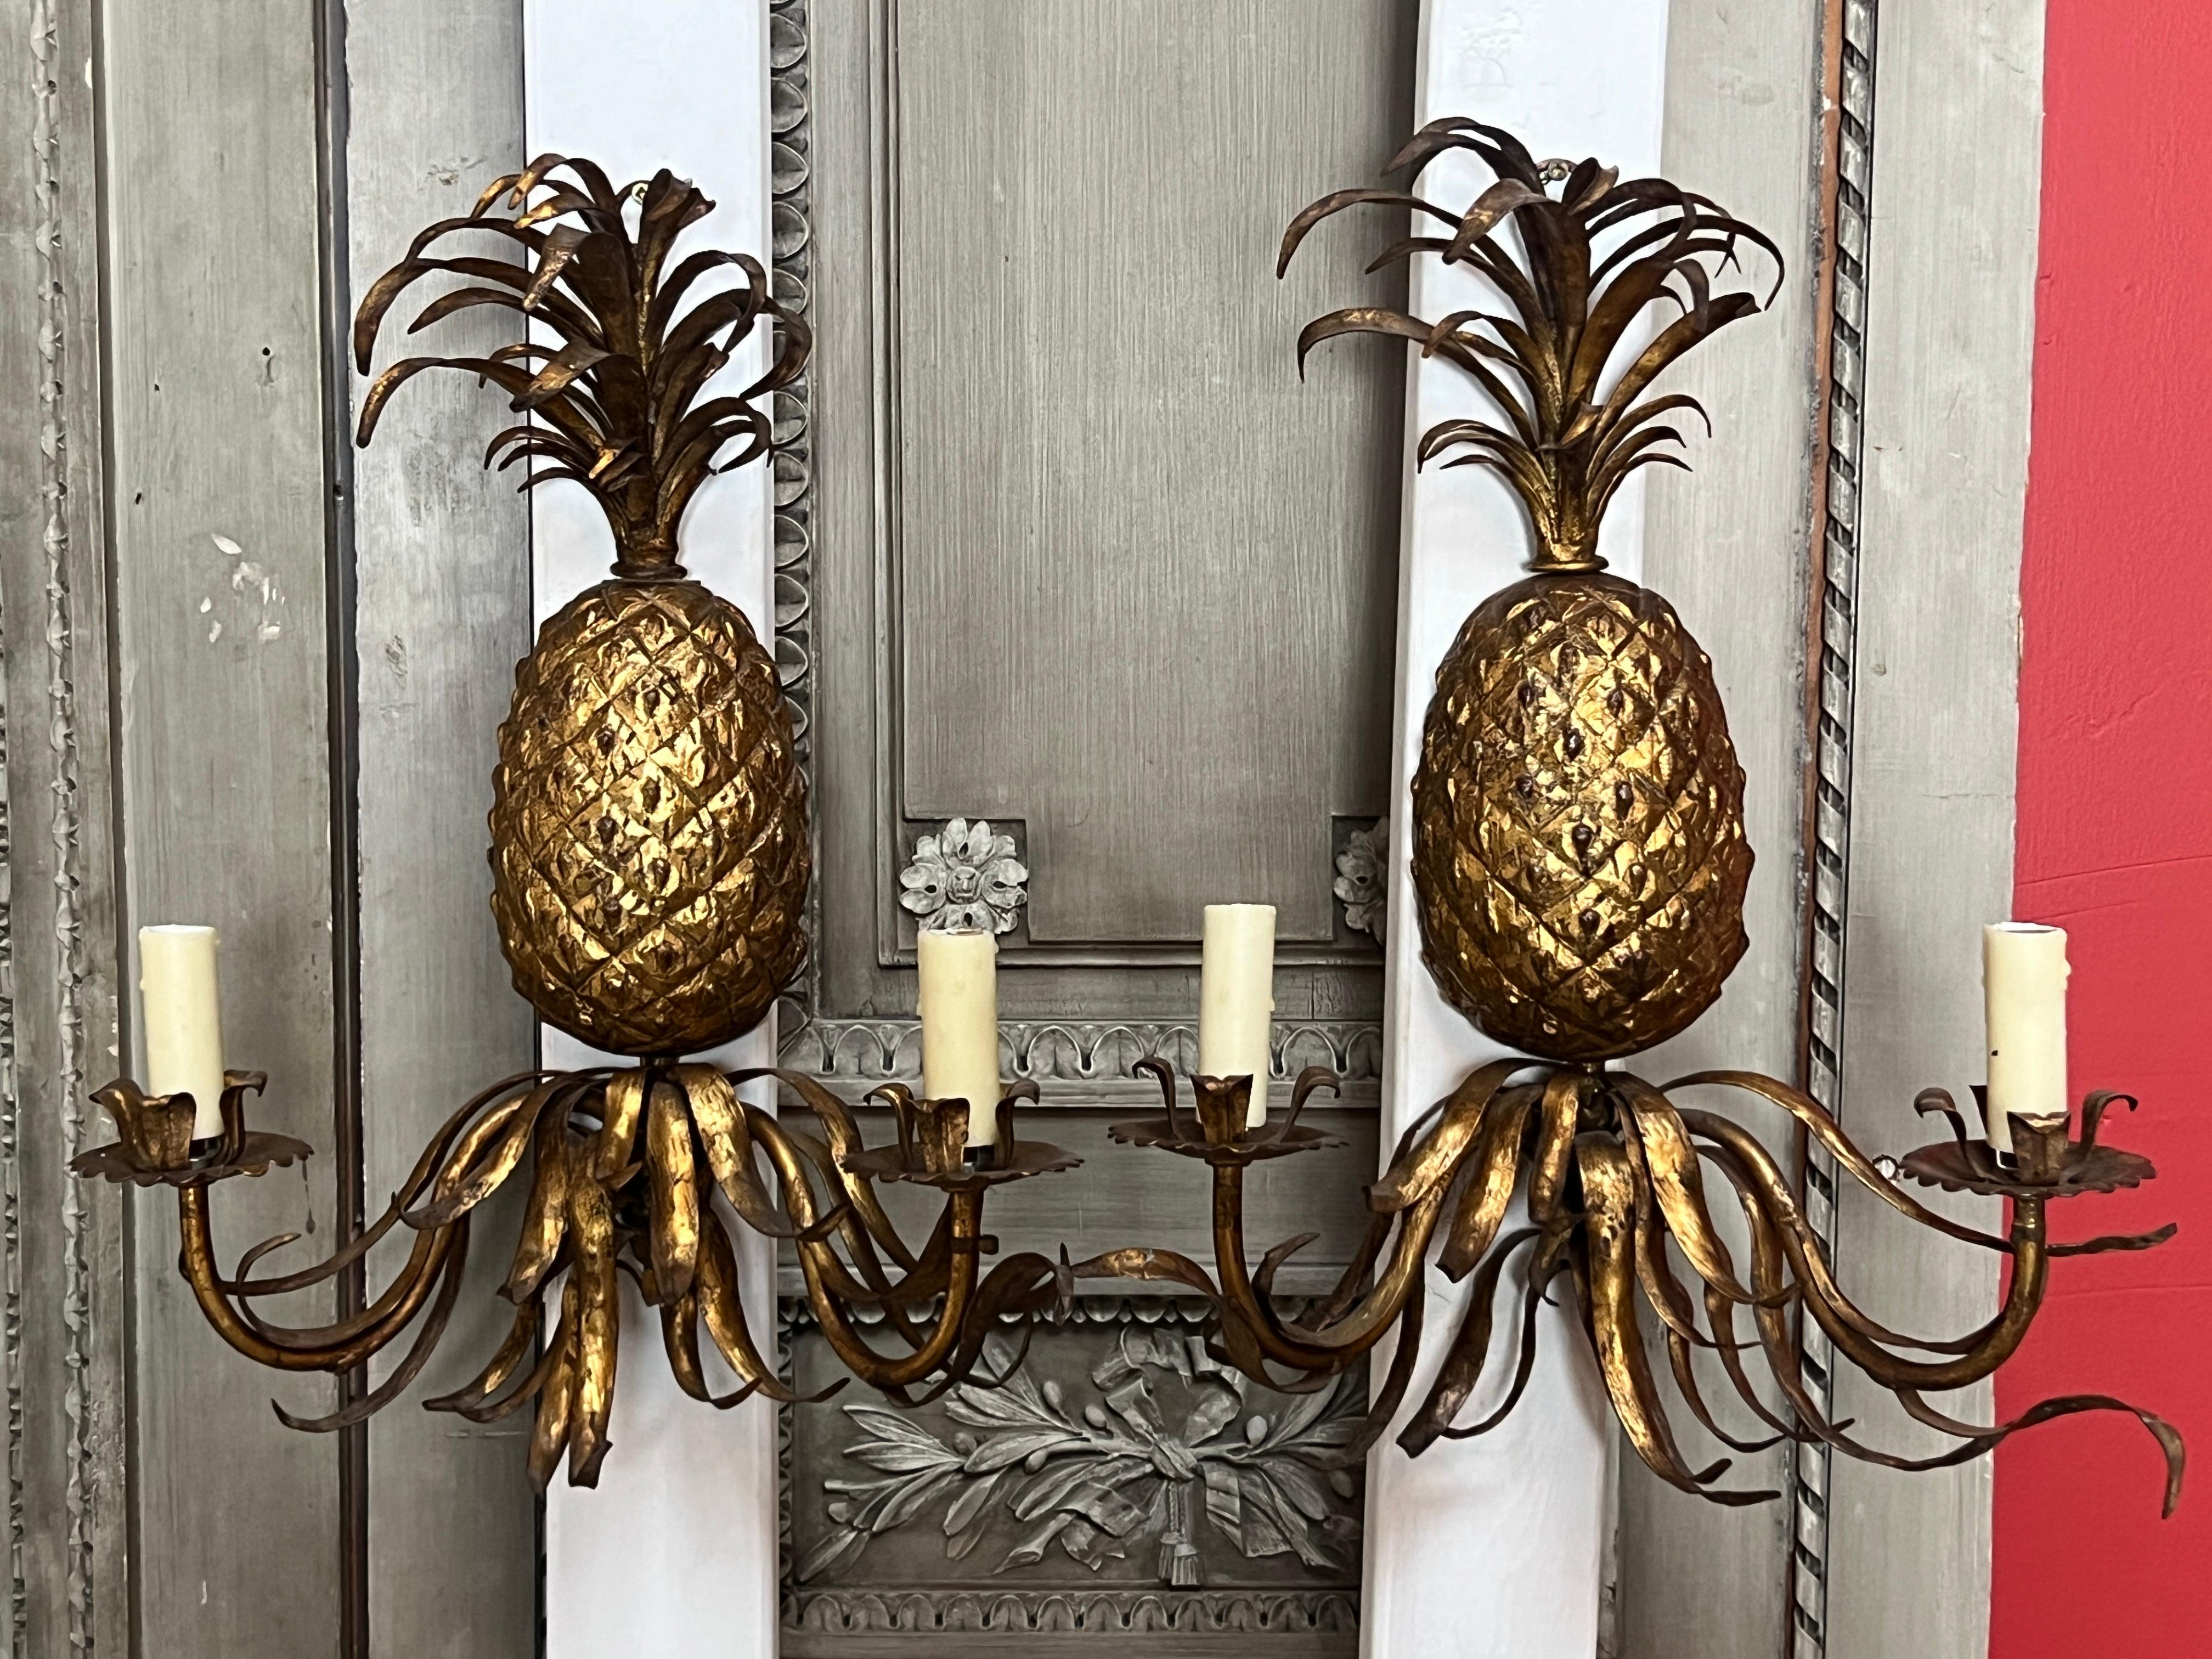 A pair of very decorative Italian Gilt iron scones with a pineapple motif.  
These two light wall lights are in a great old finish with a glazed gold finish. 
There is a matching chandelier available for a great dining room lighting suite.  